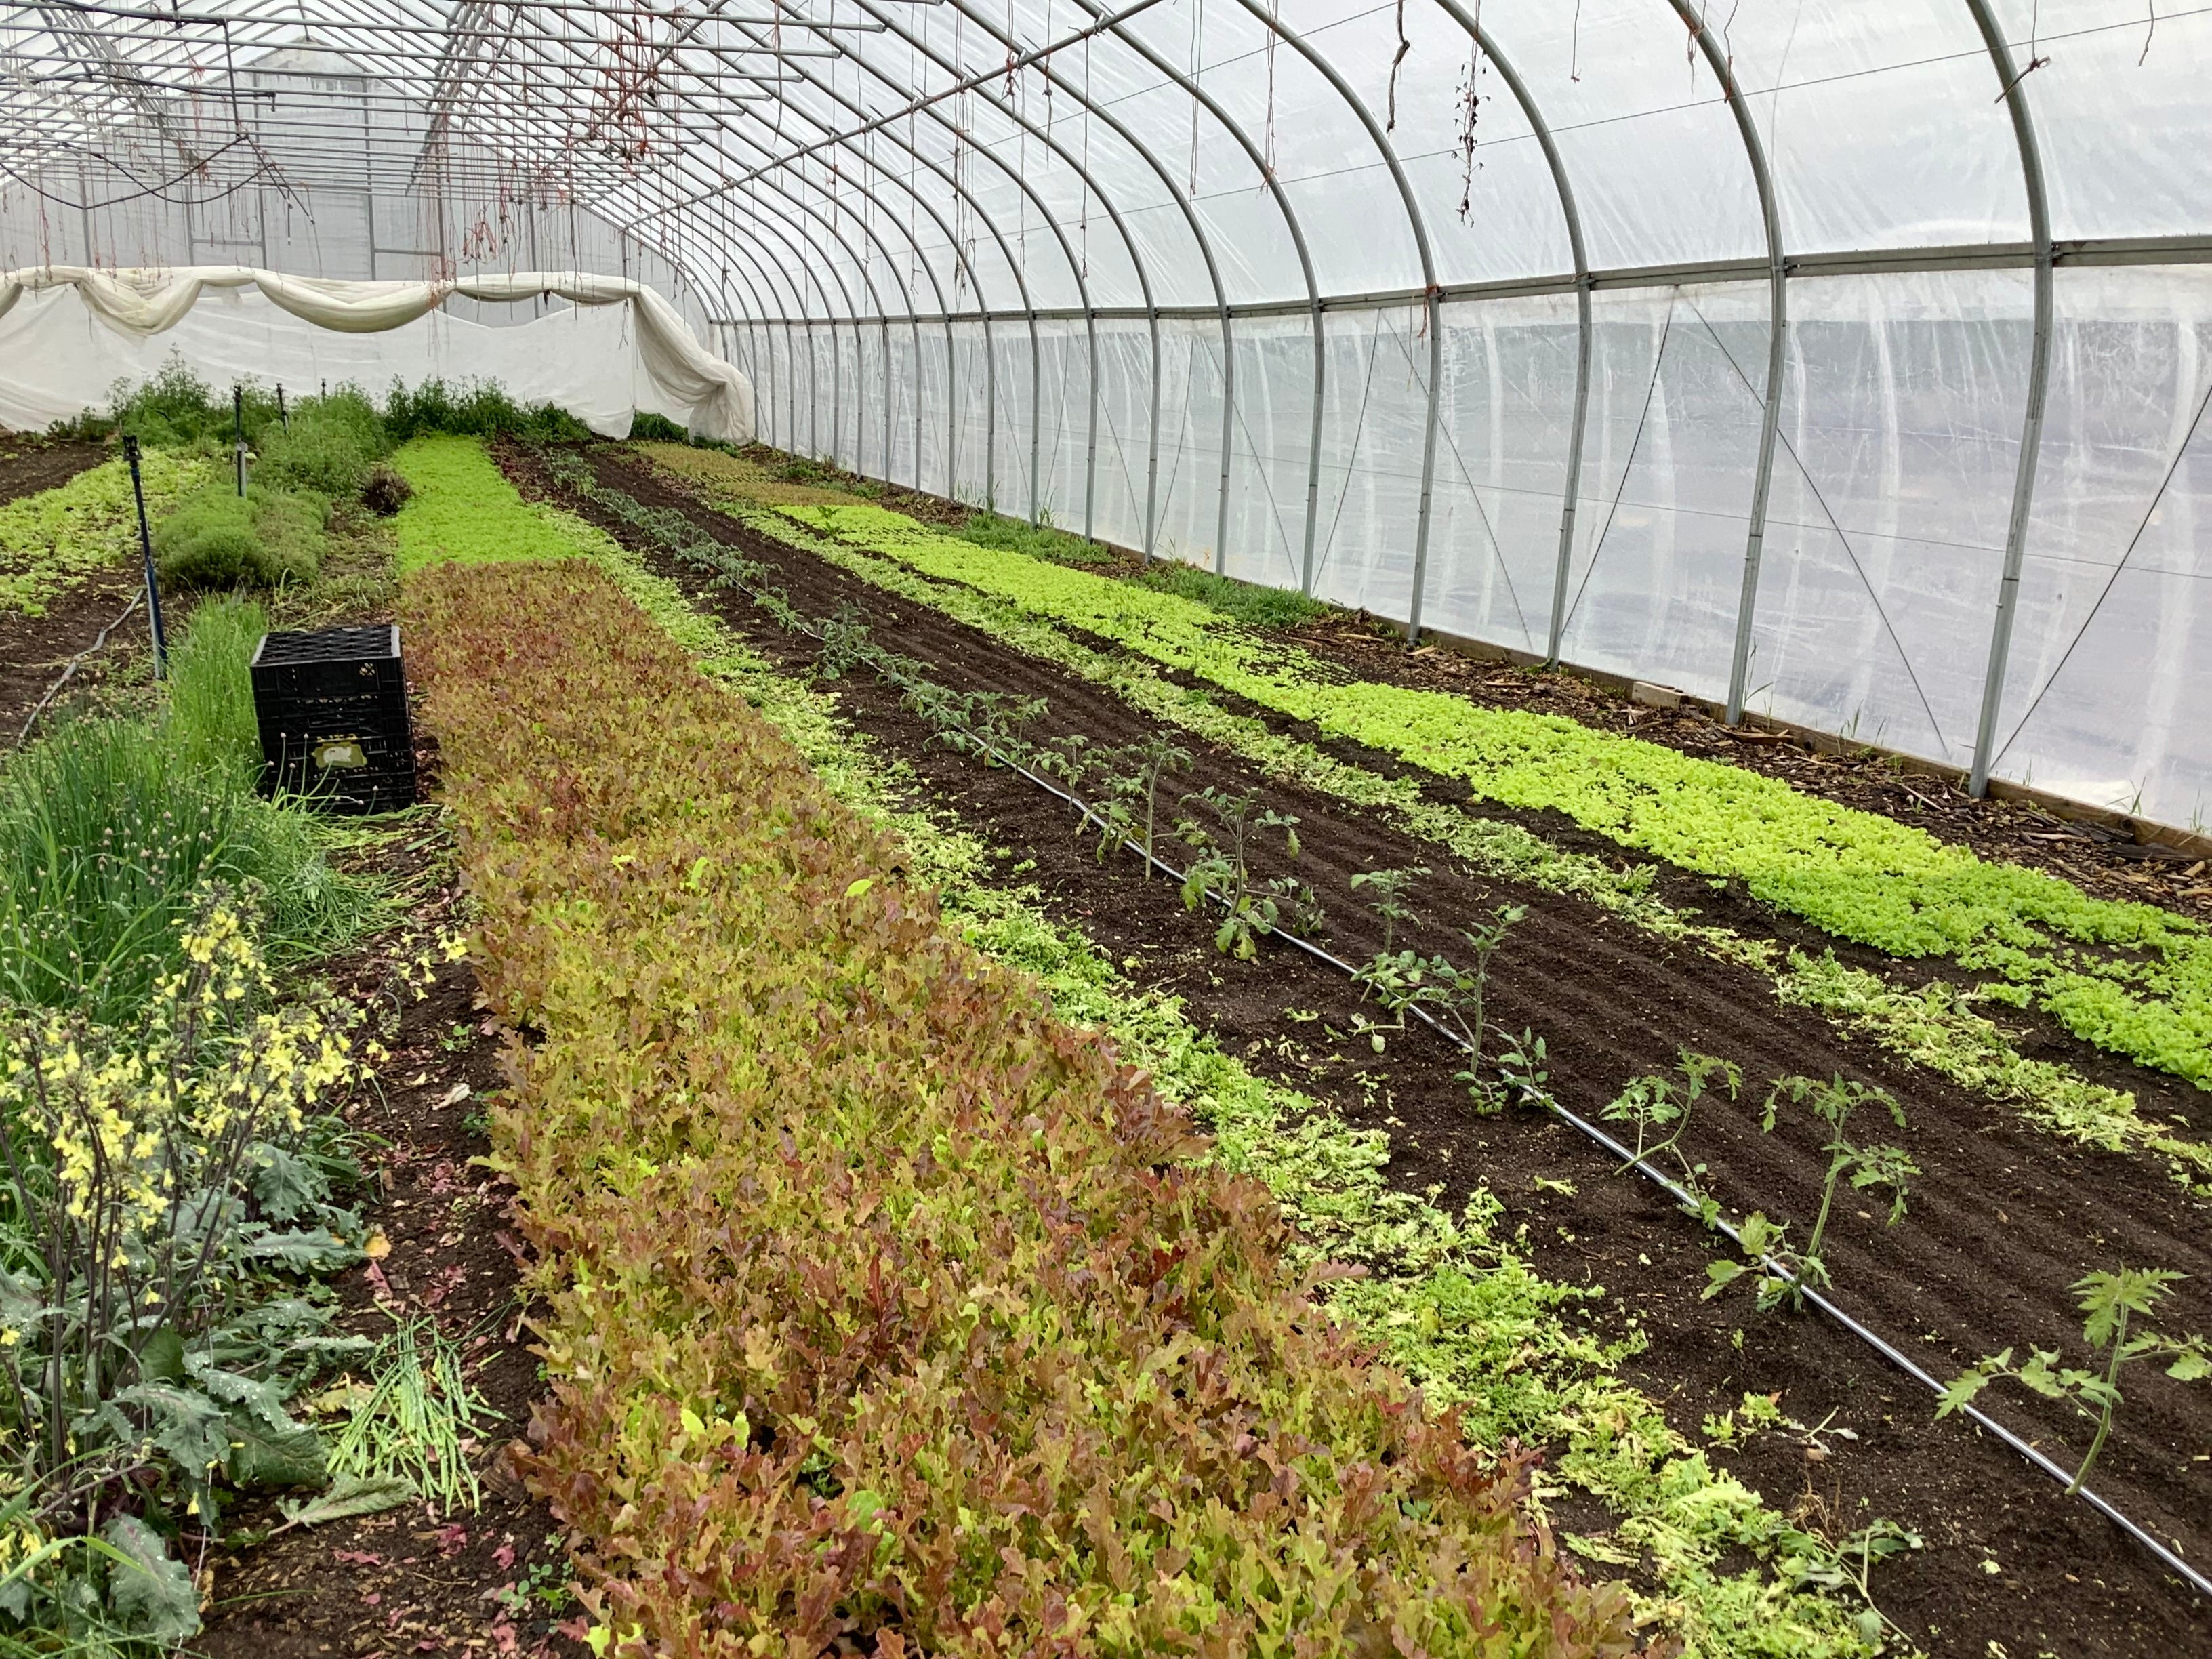 Rows of green vegetables are grown inside a large greenhouse